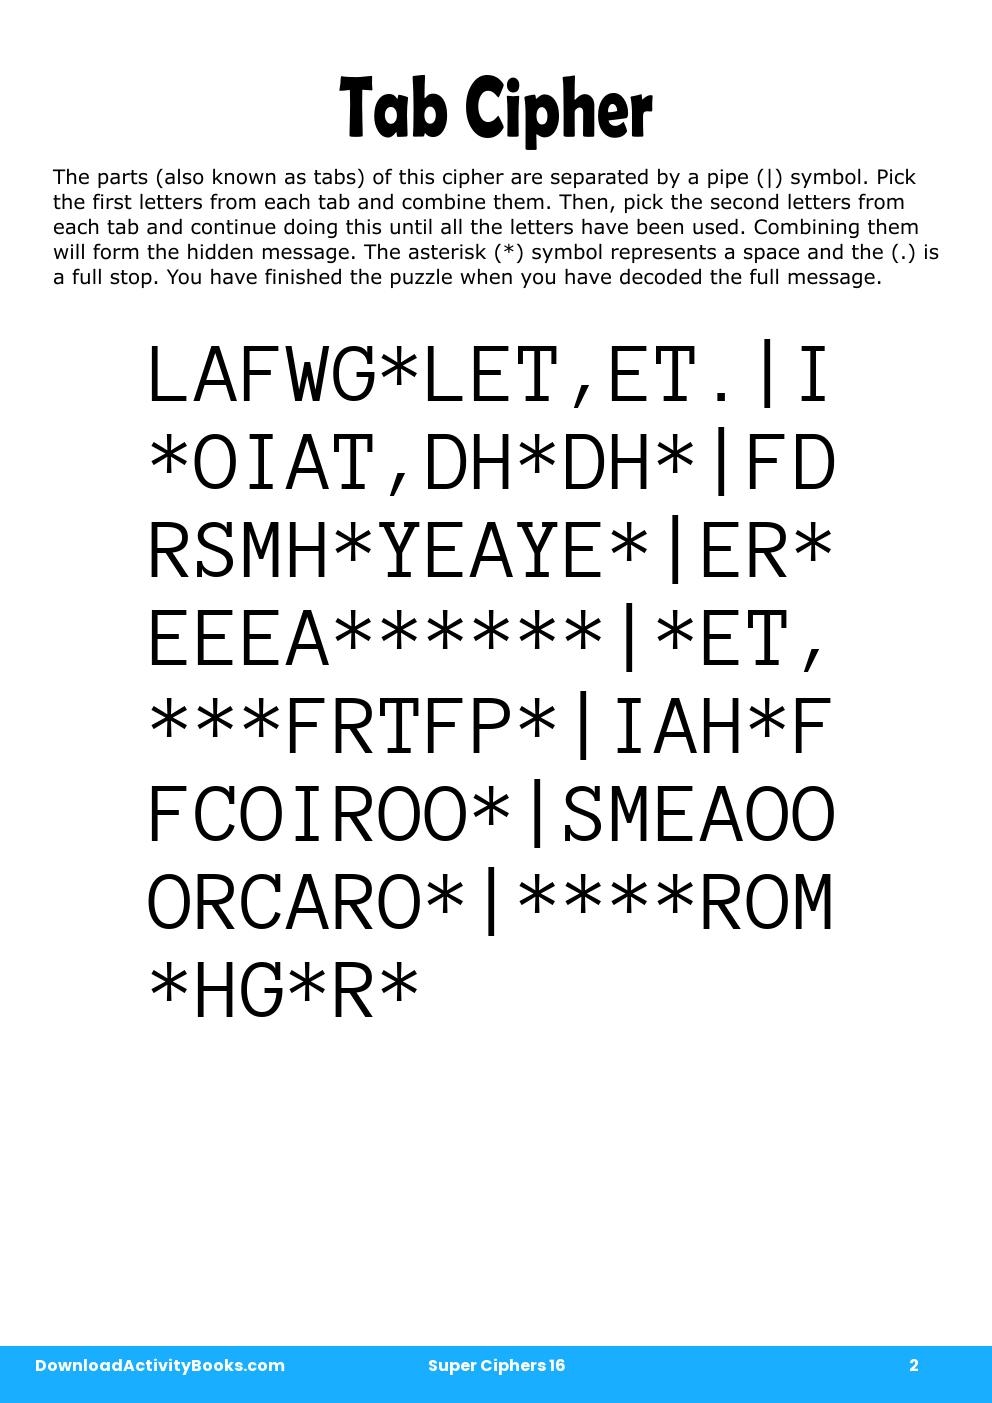 Tab Cipher in Super Ciphers 16